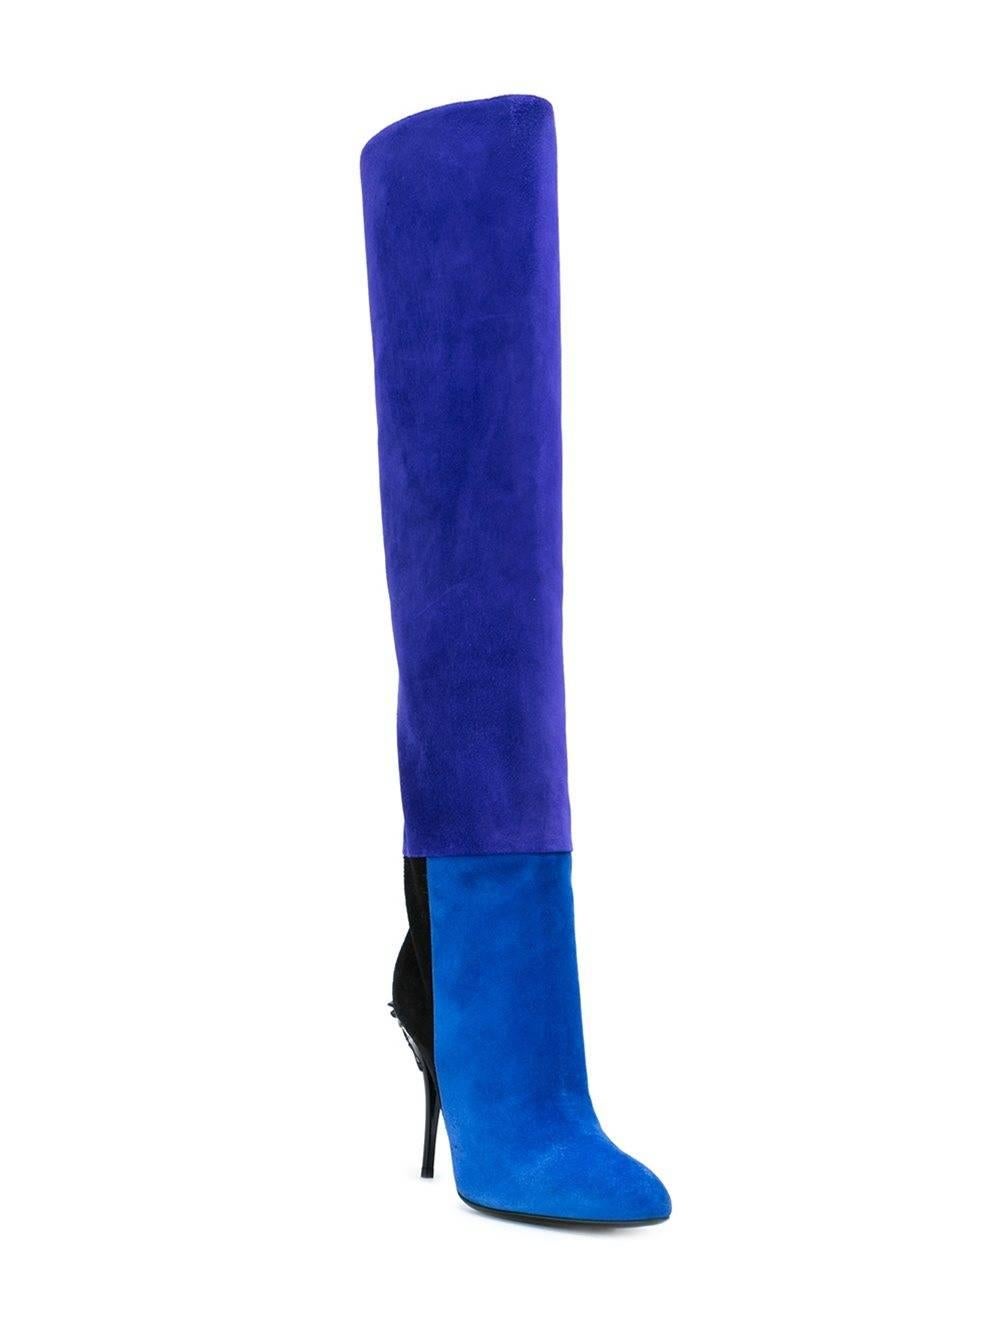 VERSACE BOOTS

These Palazzo color block knee high suede boots are a quintessential style for the modern woman.

Soft suede
Medusa embellished Stiletto heel
100% leather
Made in Italy

IT Size 38 - US 8

New, in the box.  